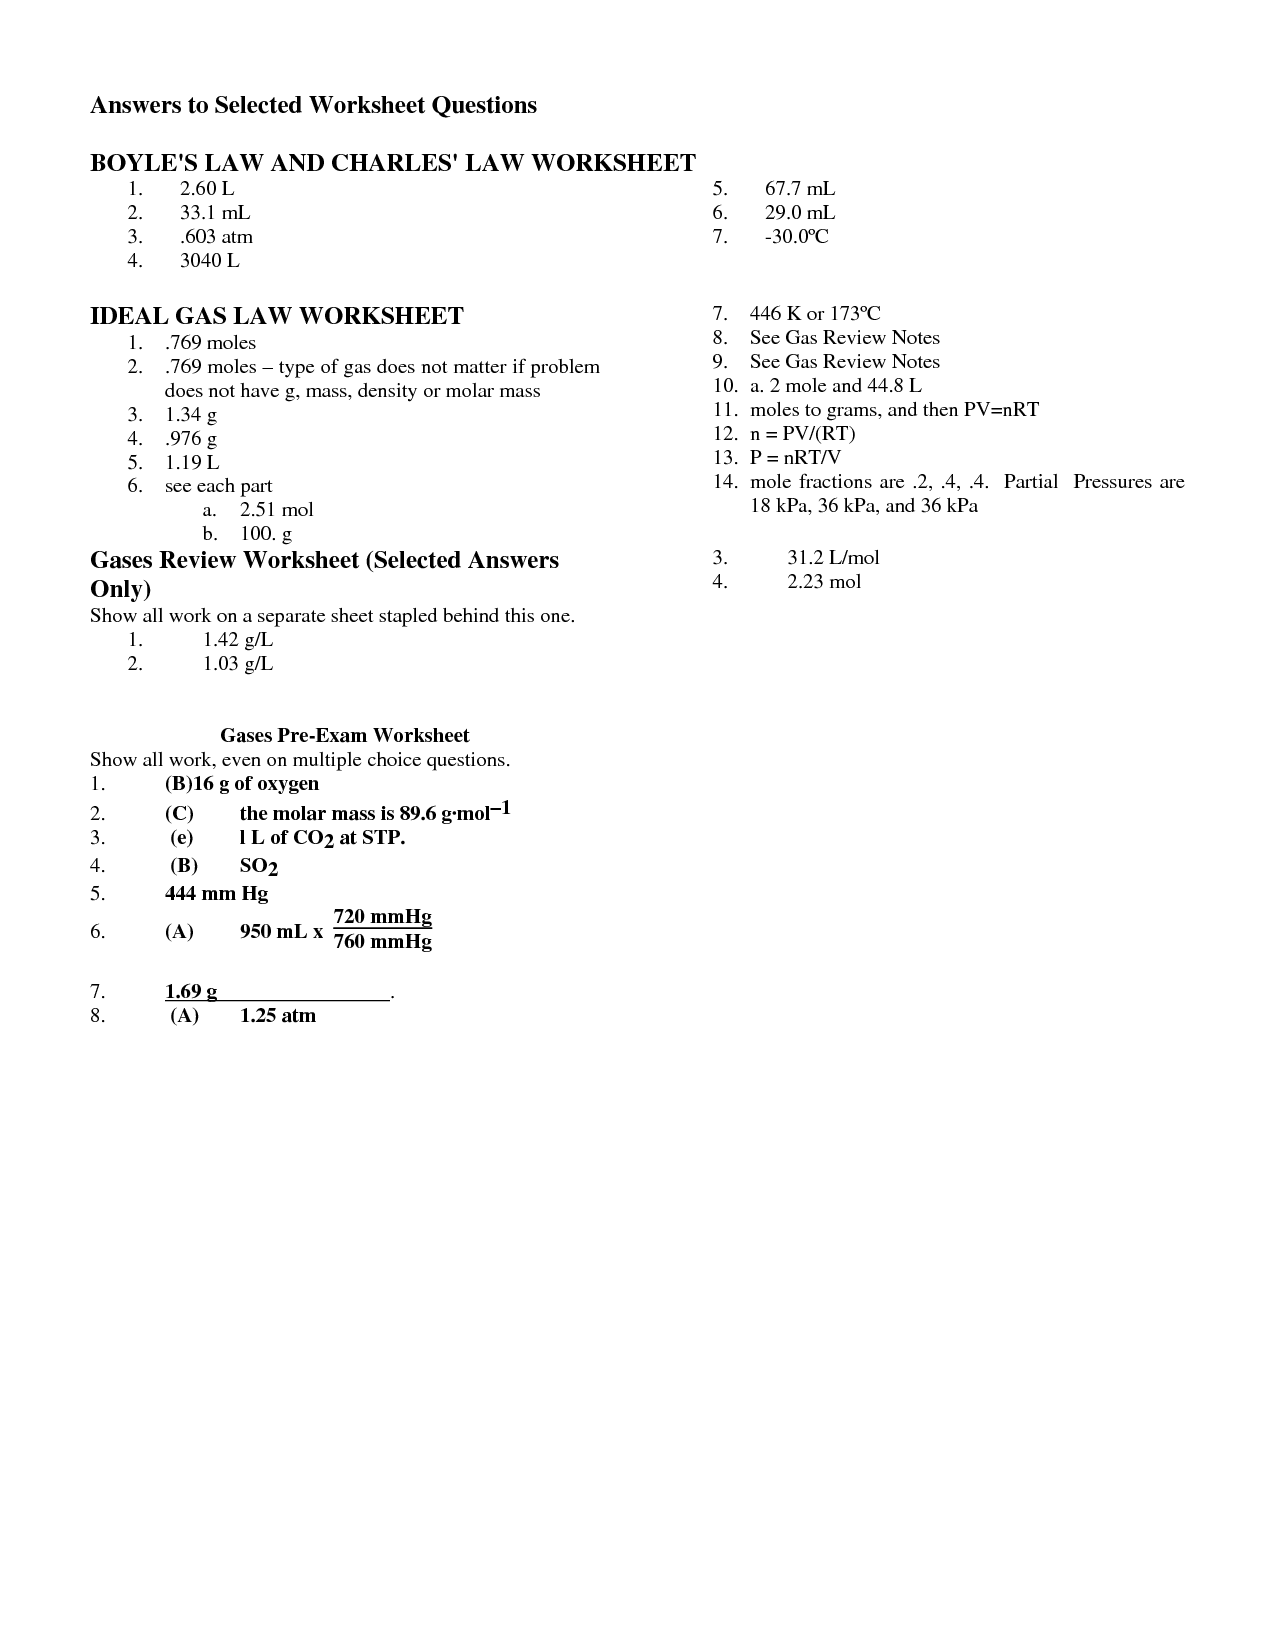 Charles and Boyle's Law Worksheet Answers